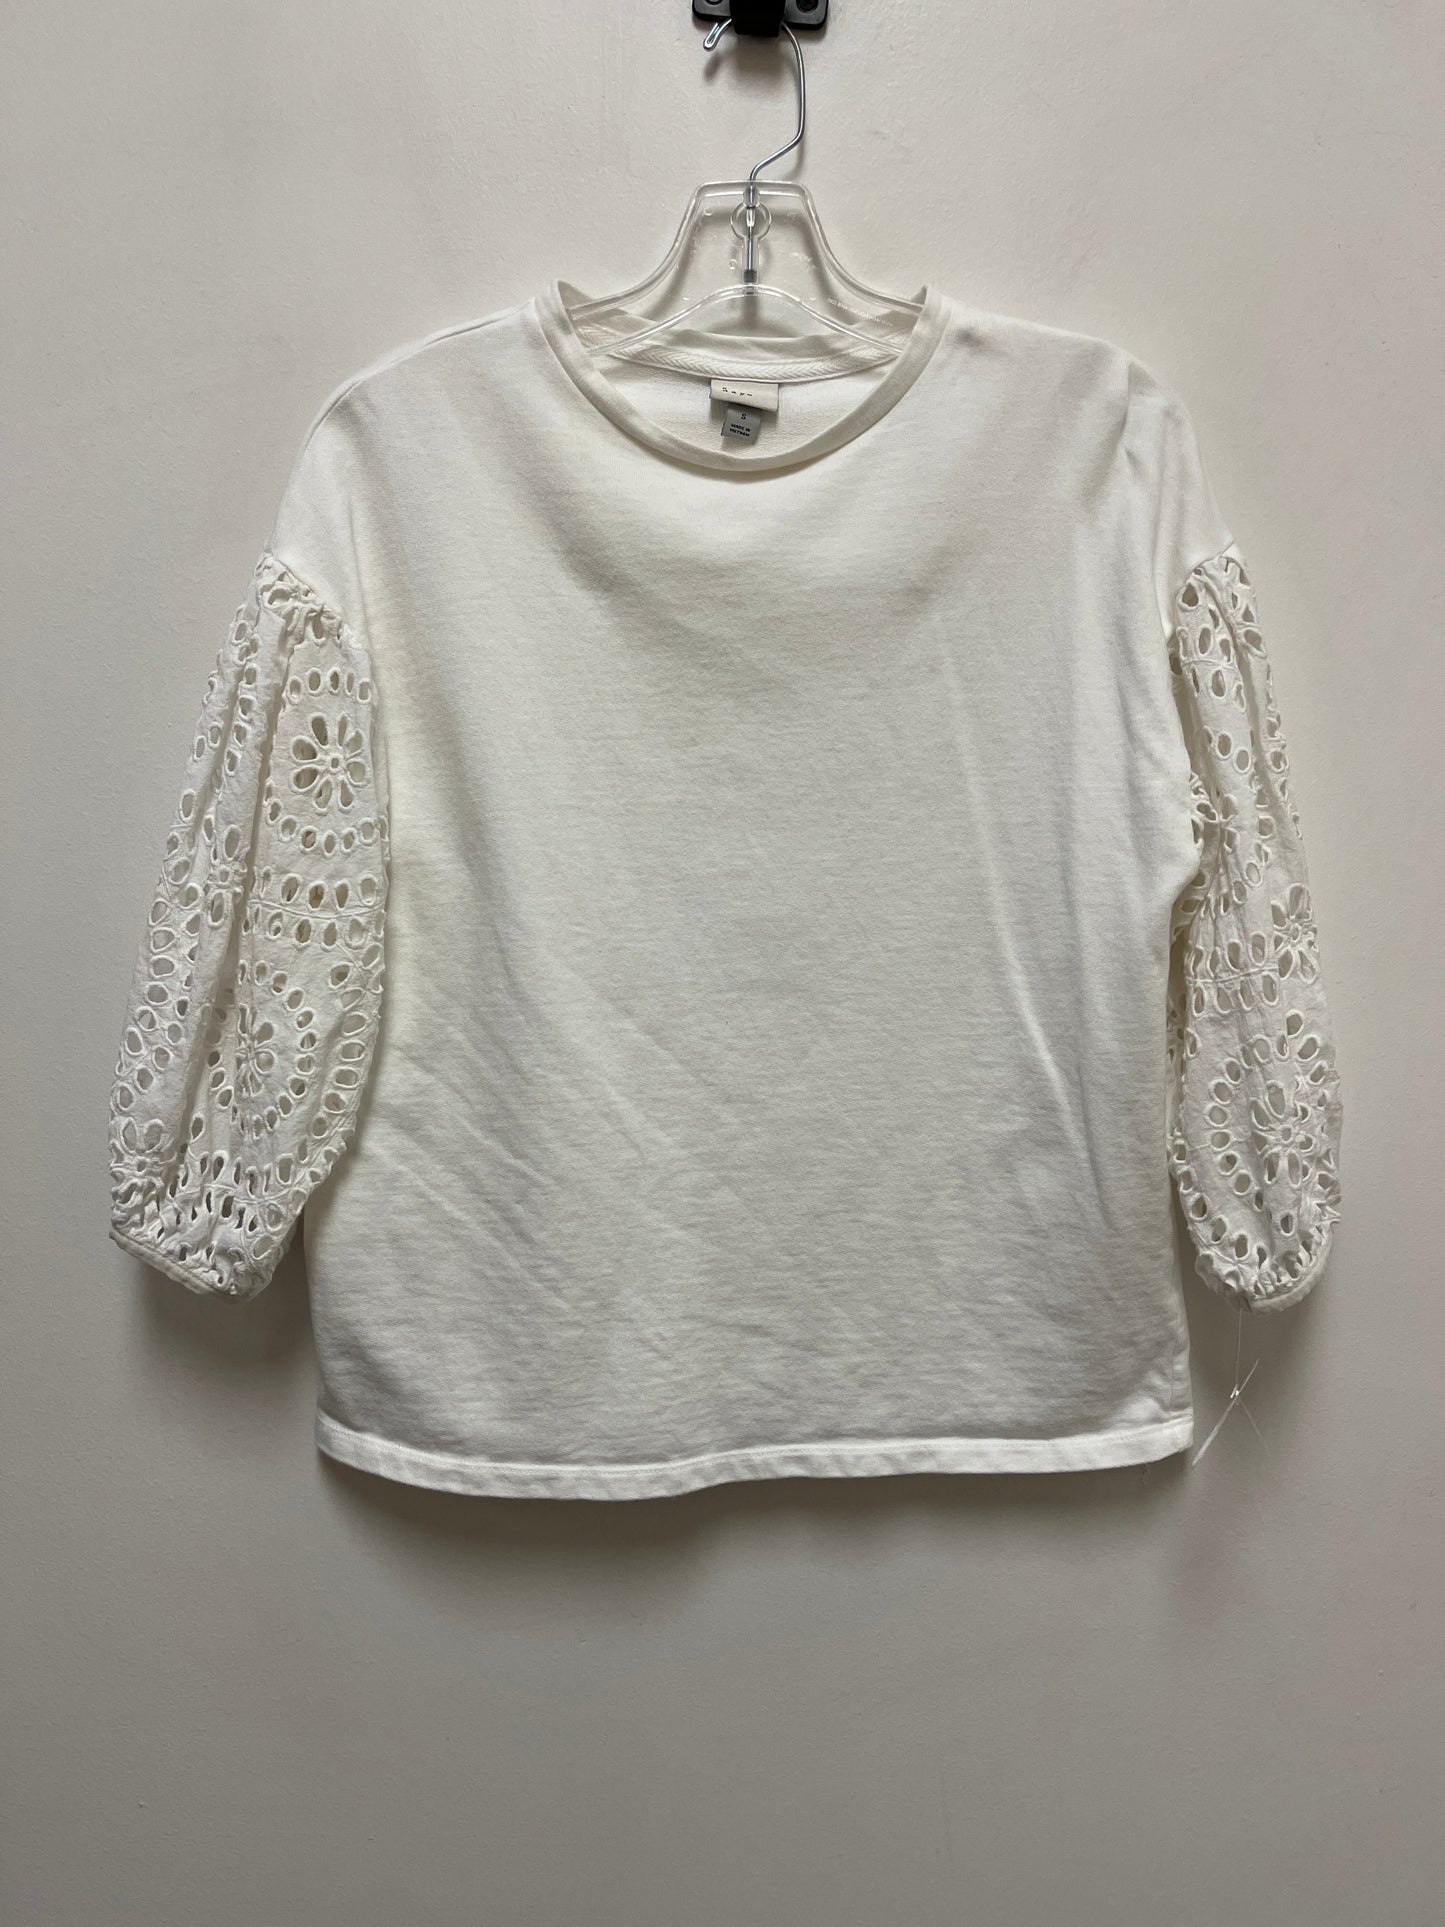 White Top Long Sleeve A New Day, Size S